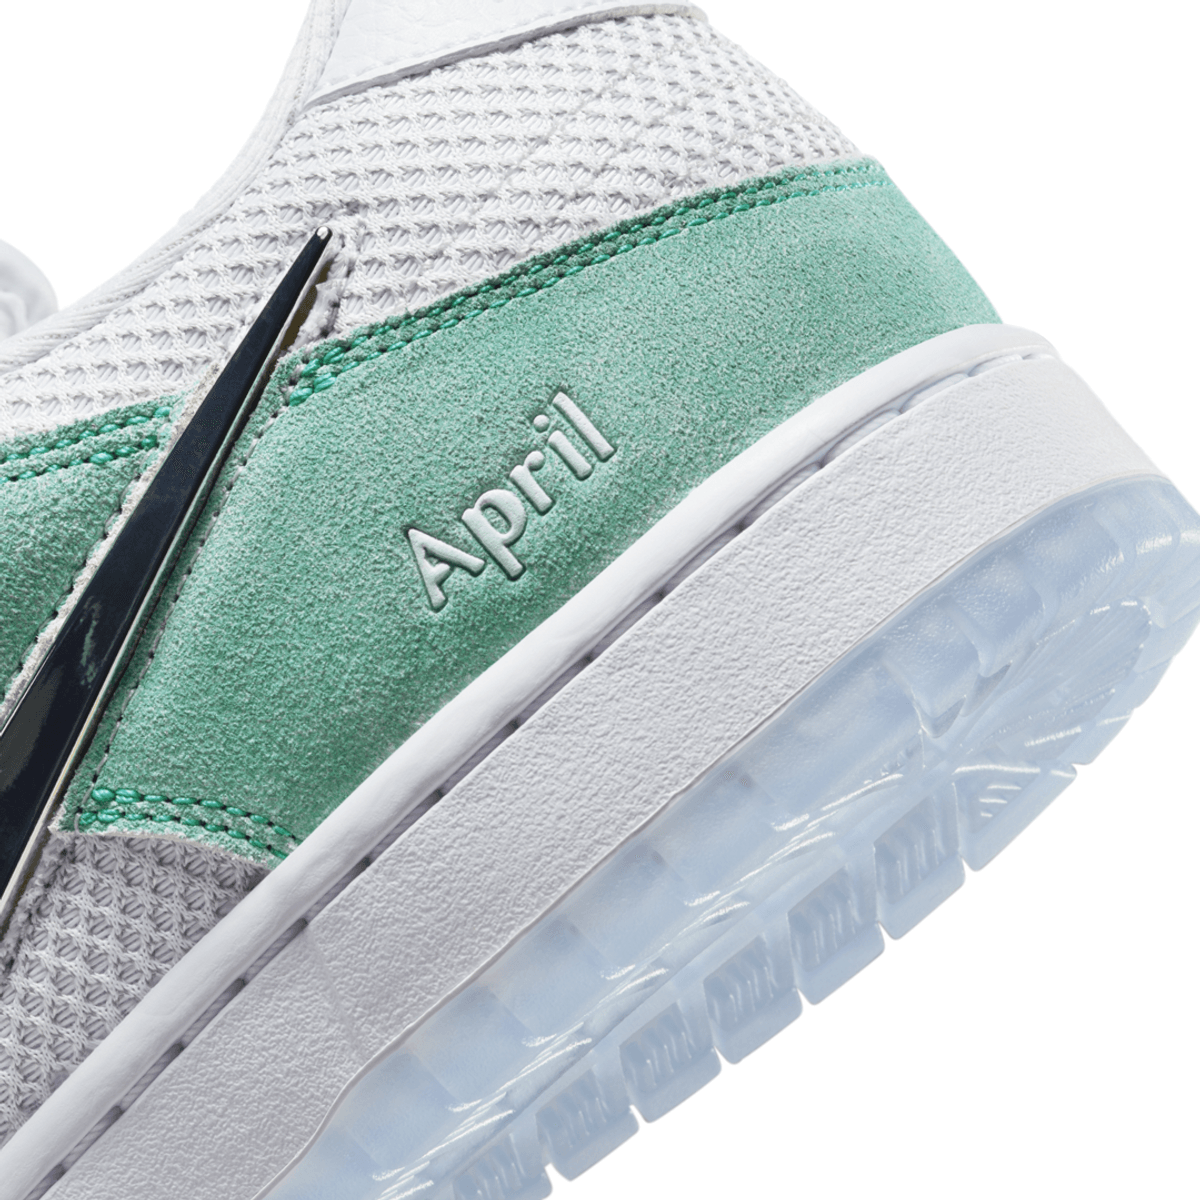 April Skateboards New SB Dunk Collab Looks Like It Could Walk On Water